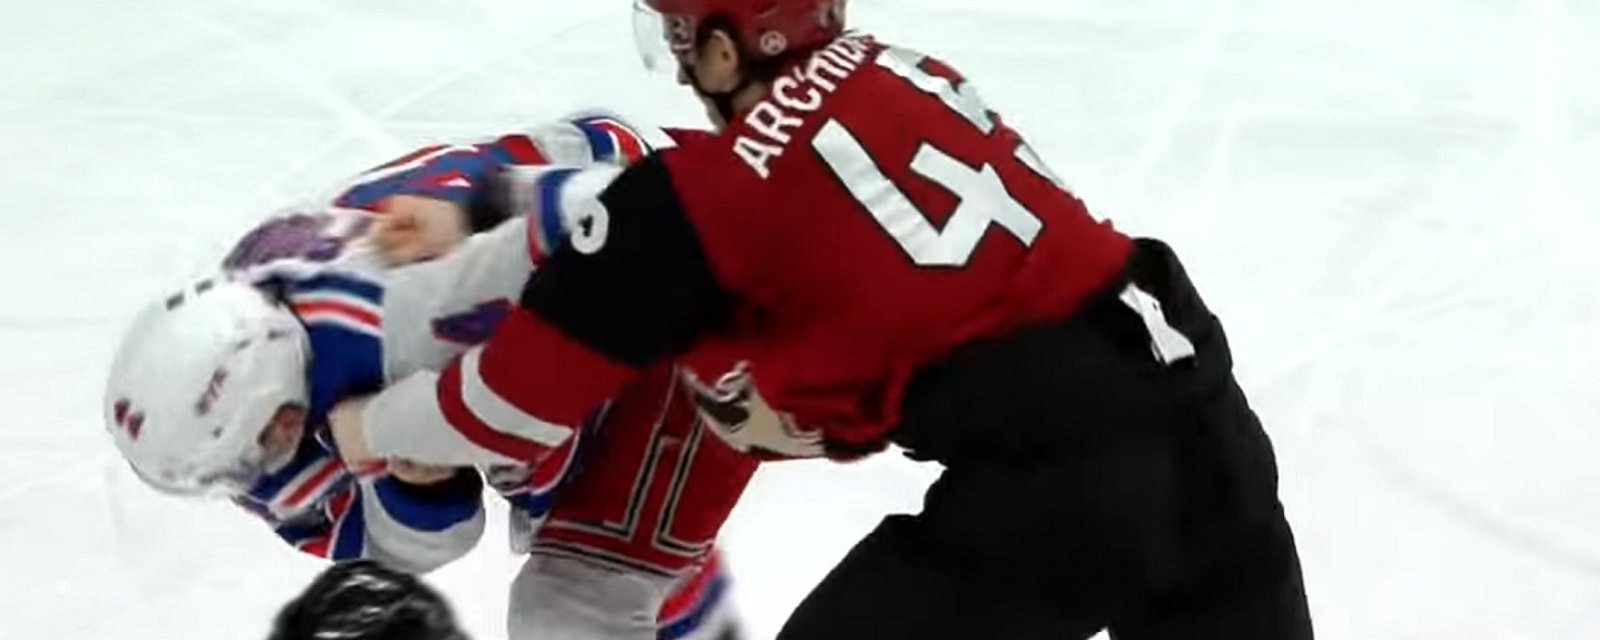 Archibald gets crosschecked and responds by raining down punches on Pionk!